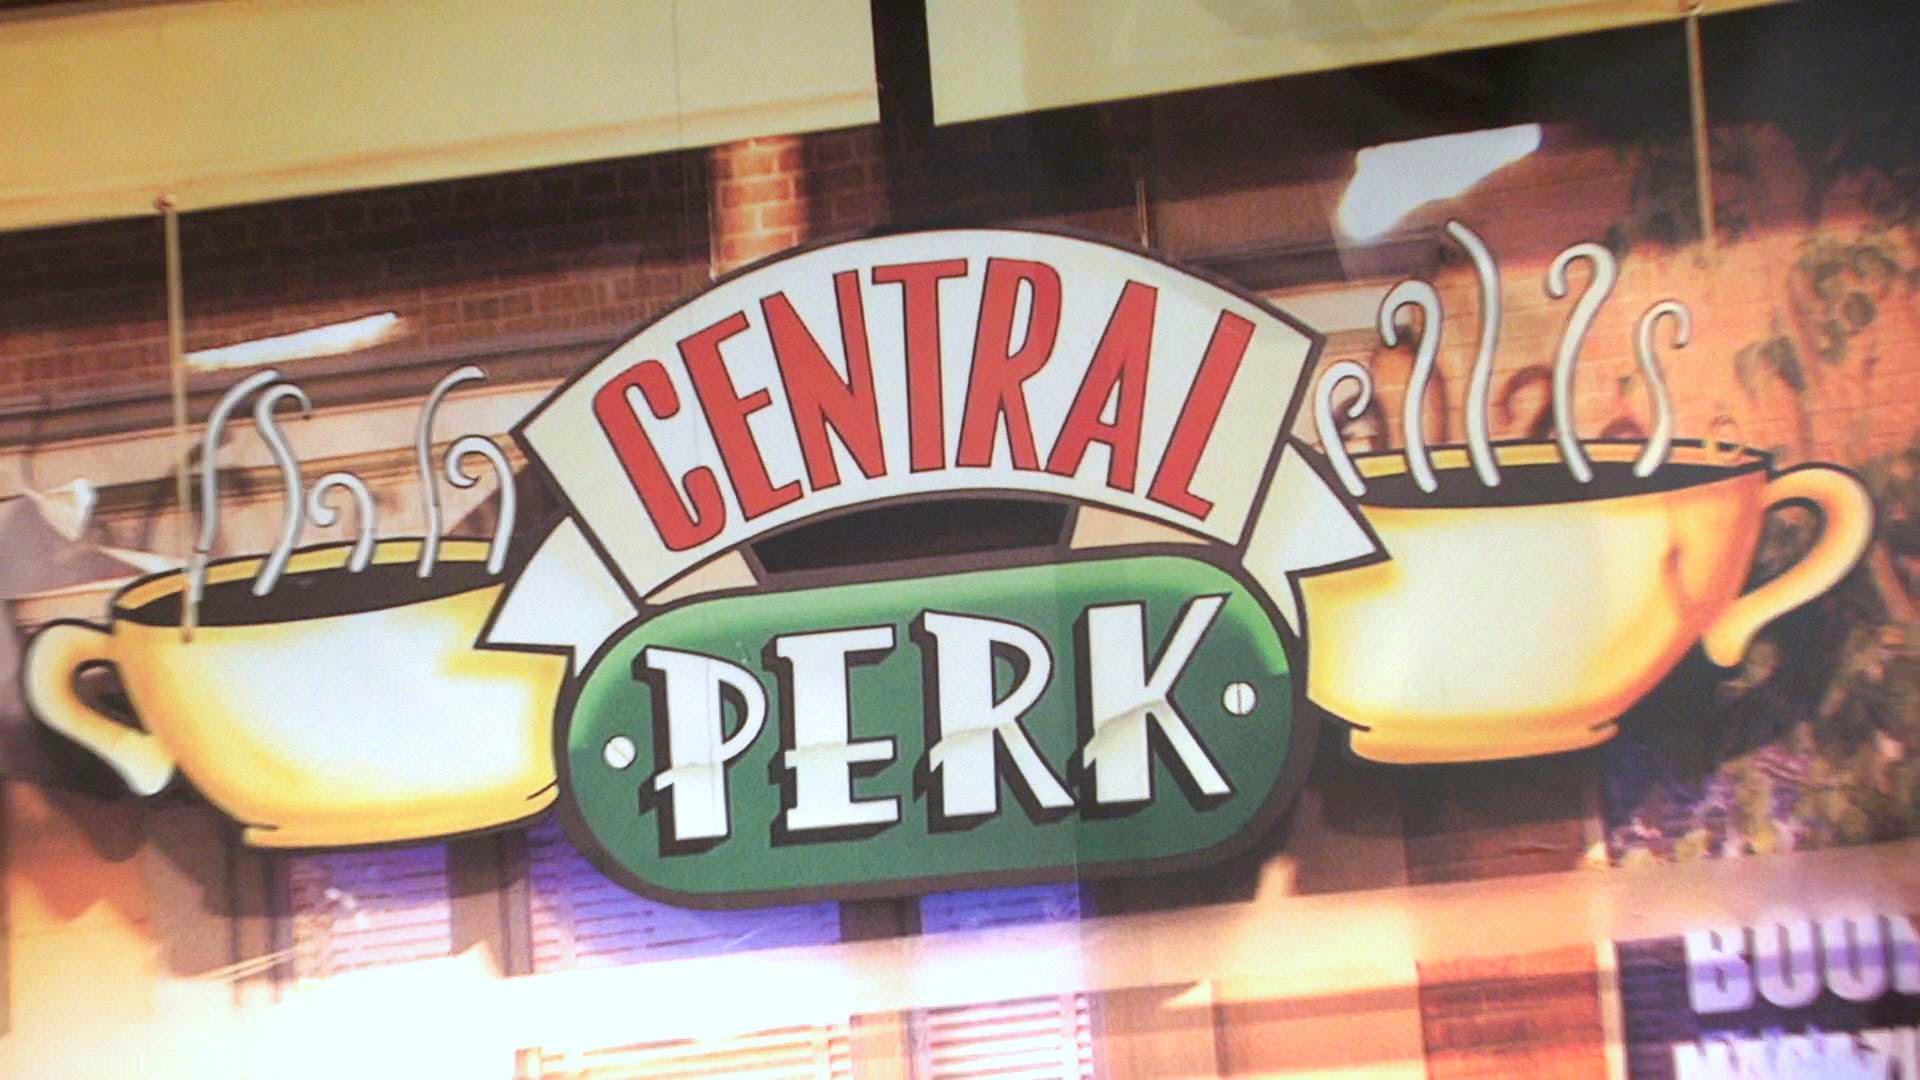 Central Perk from Friends, in Real Life